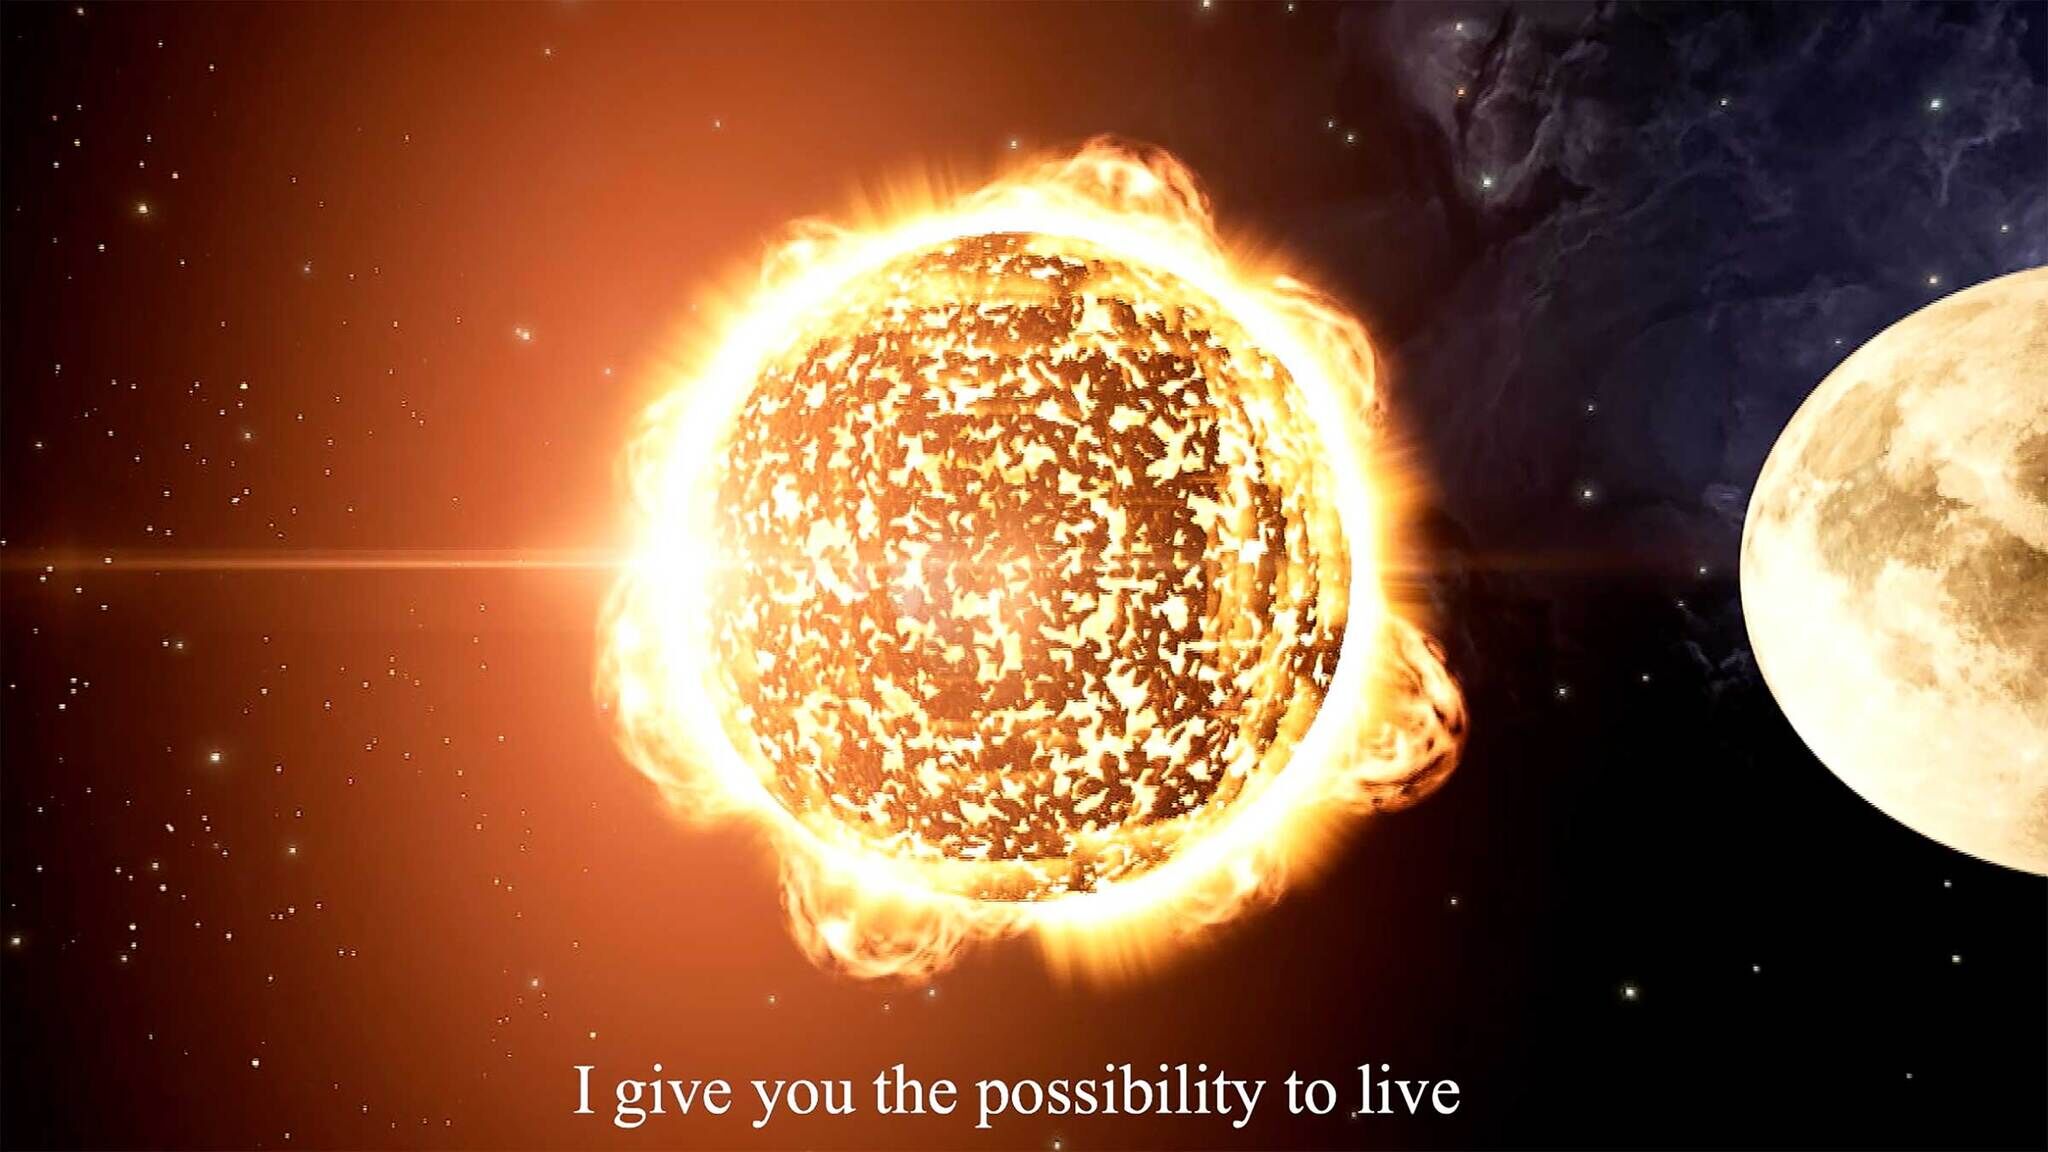 A radiant sun with flares beside a moon against a starry space backdrop, with the text "I give you the possibility to live."